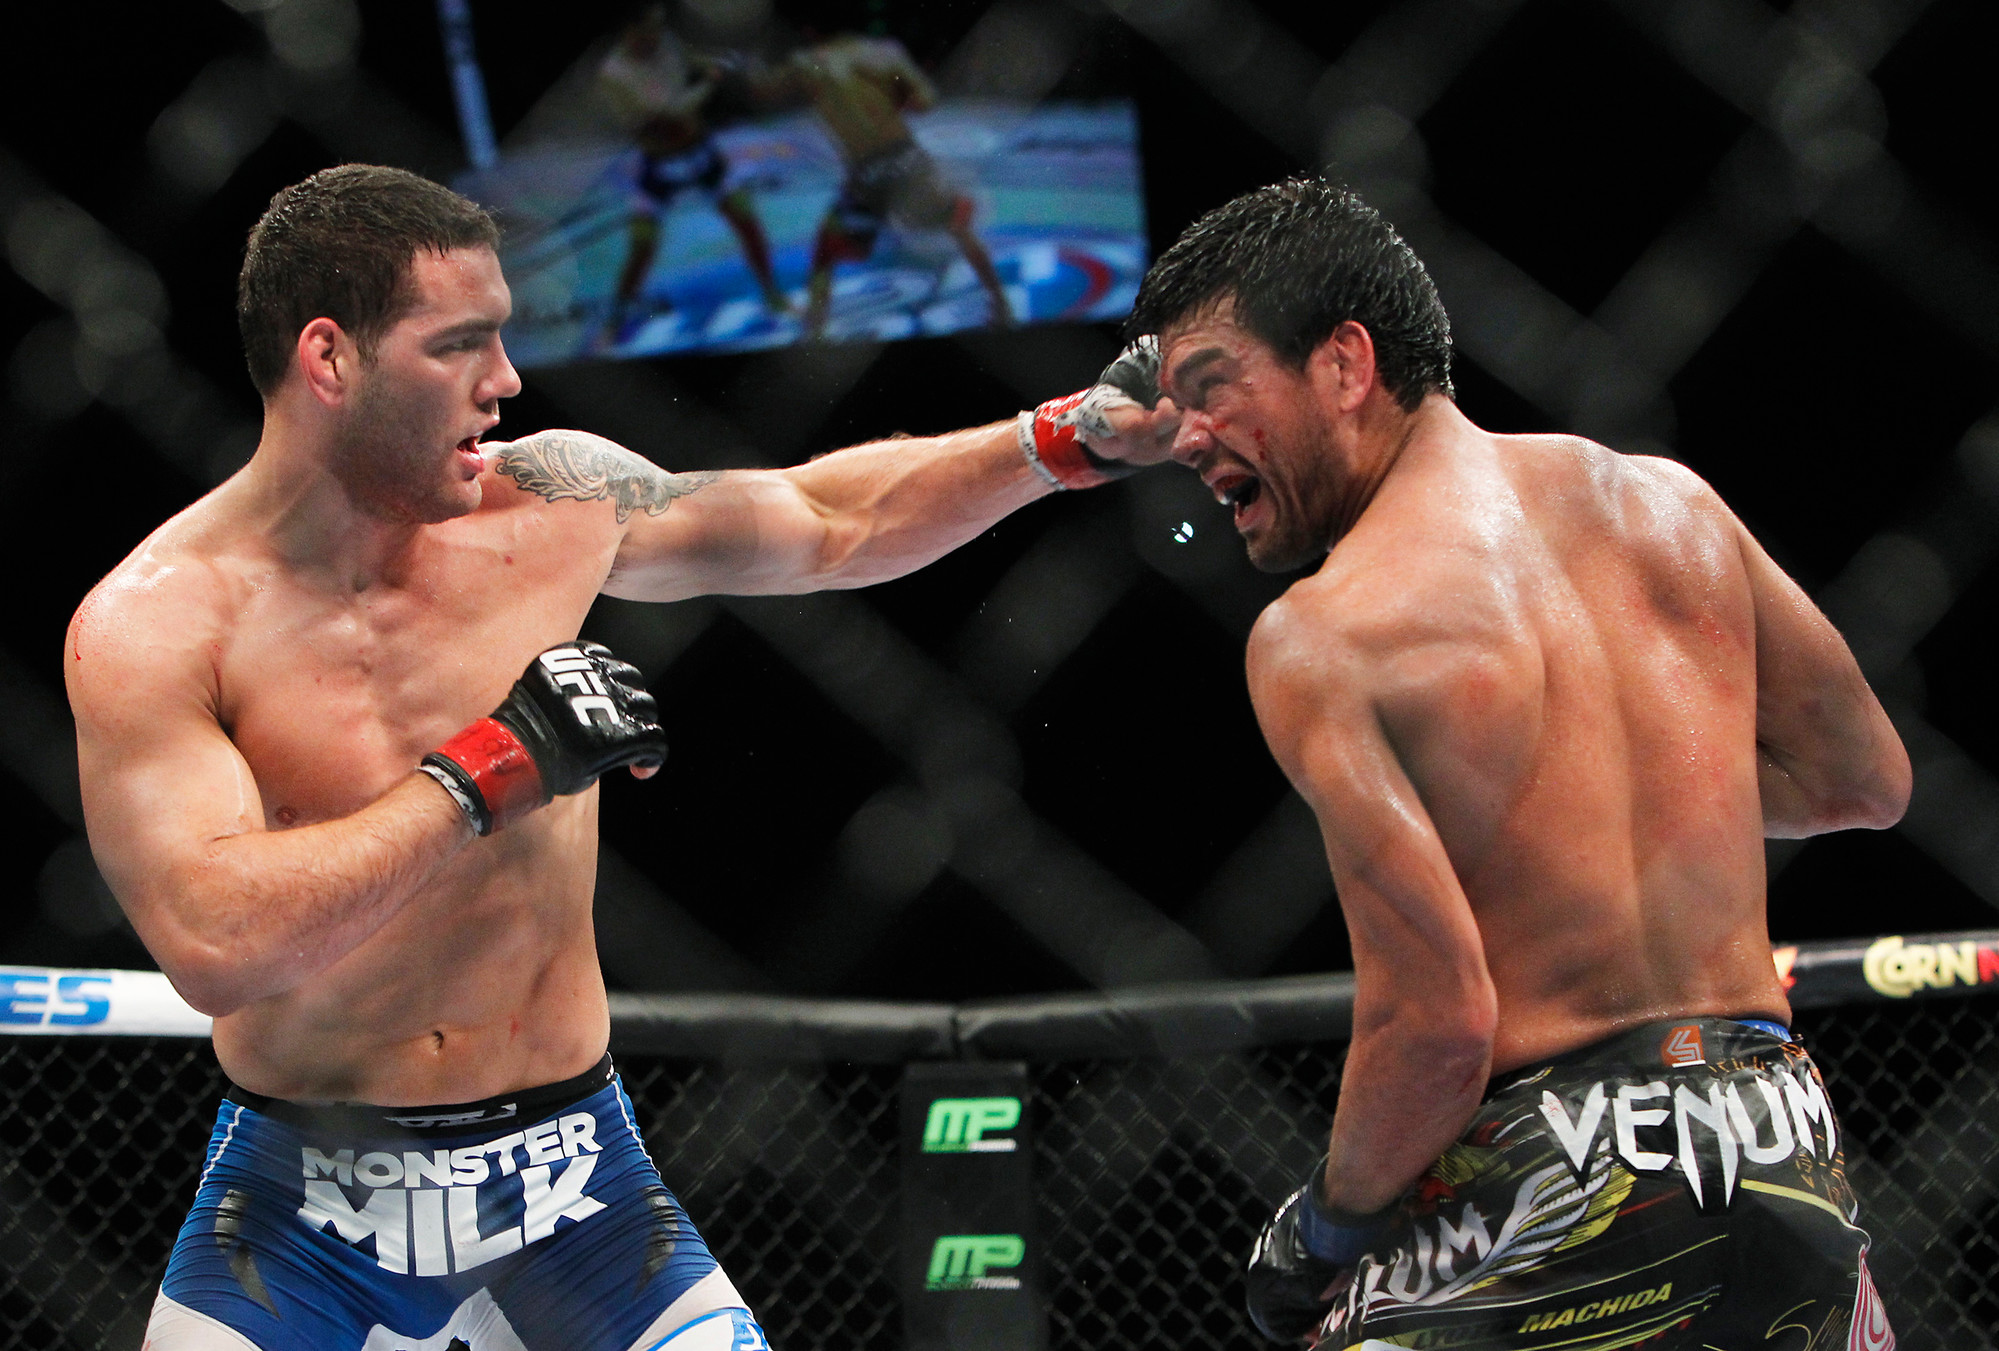 Chris Weidman, left, defeated Lyoto Machida at the Mandalay Bay Events Center in Las Vegas last Saturday to retain the UFC Middleweight title.